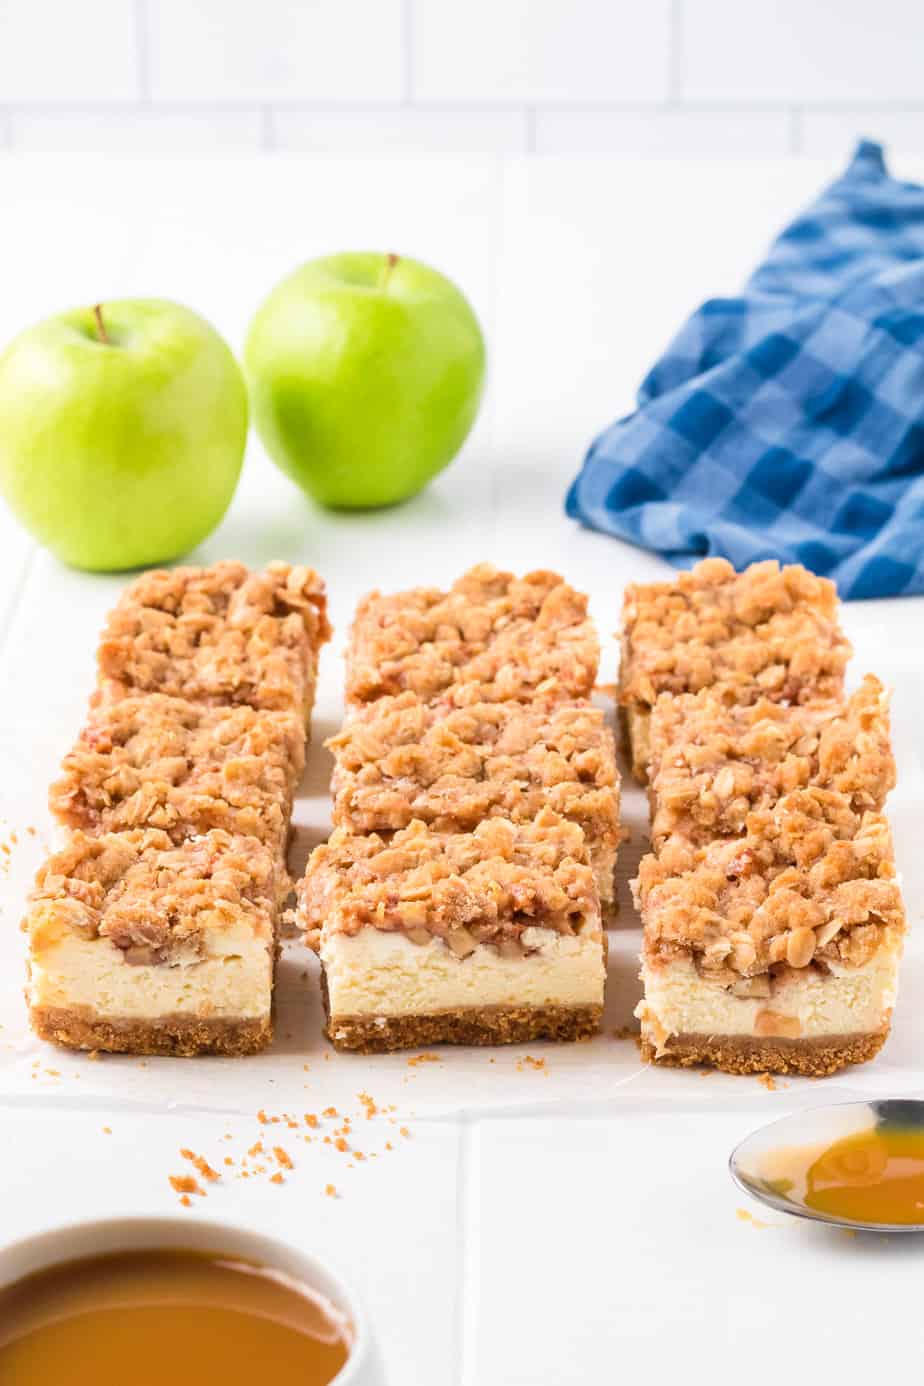 Sliced apple cheesecake bars on a counter with apples and caramel nearby on the counter.